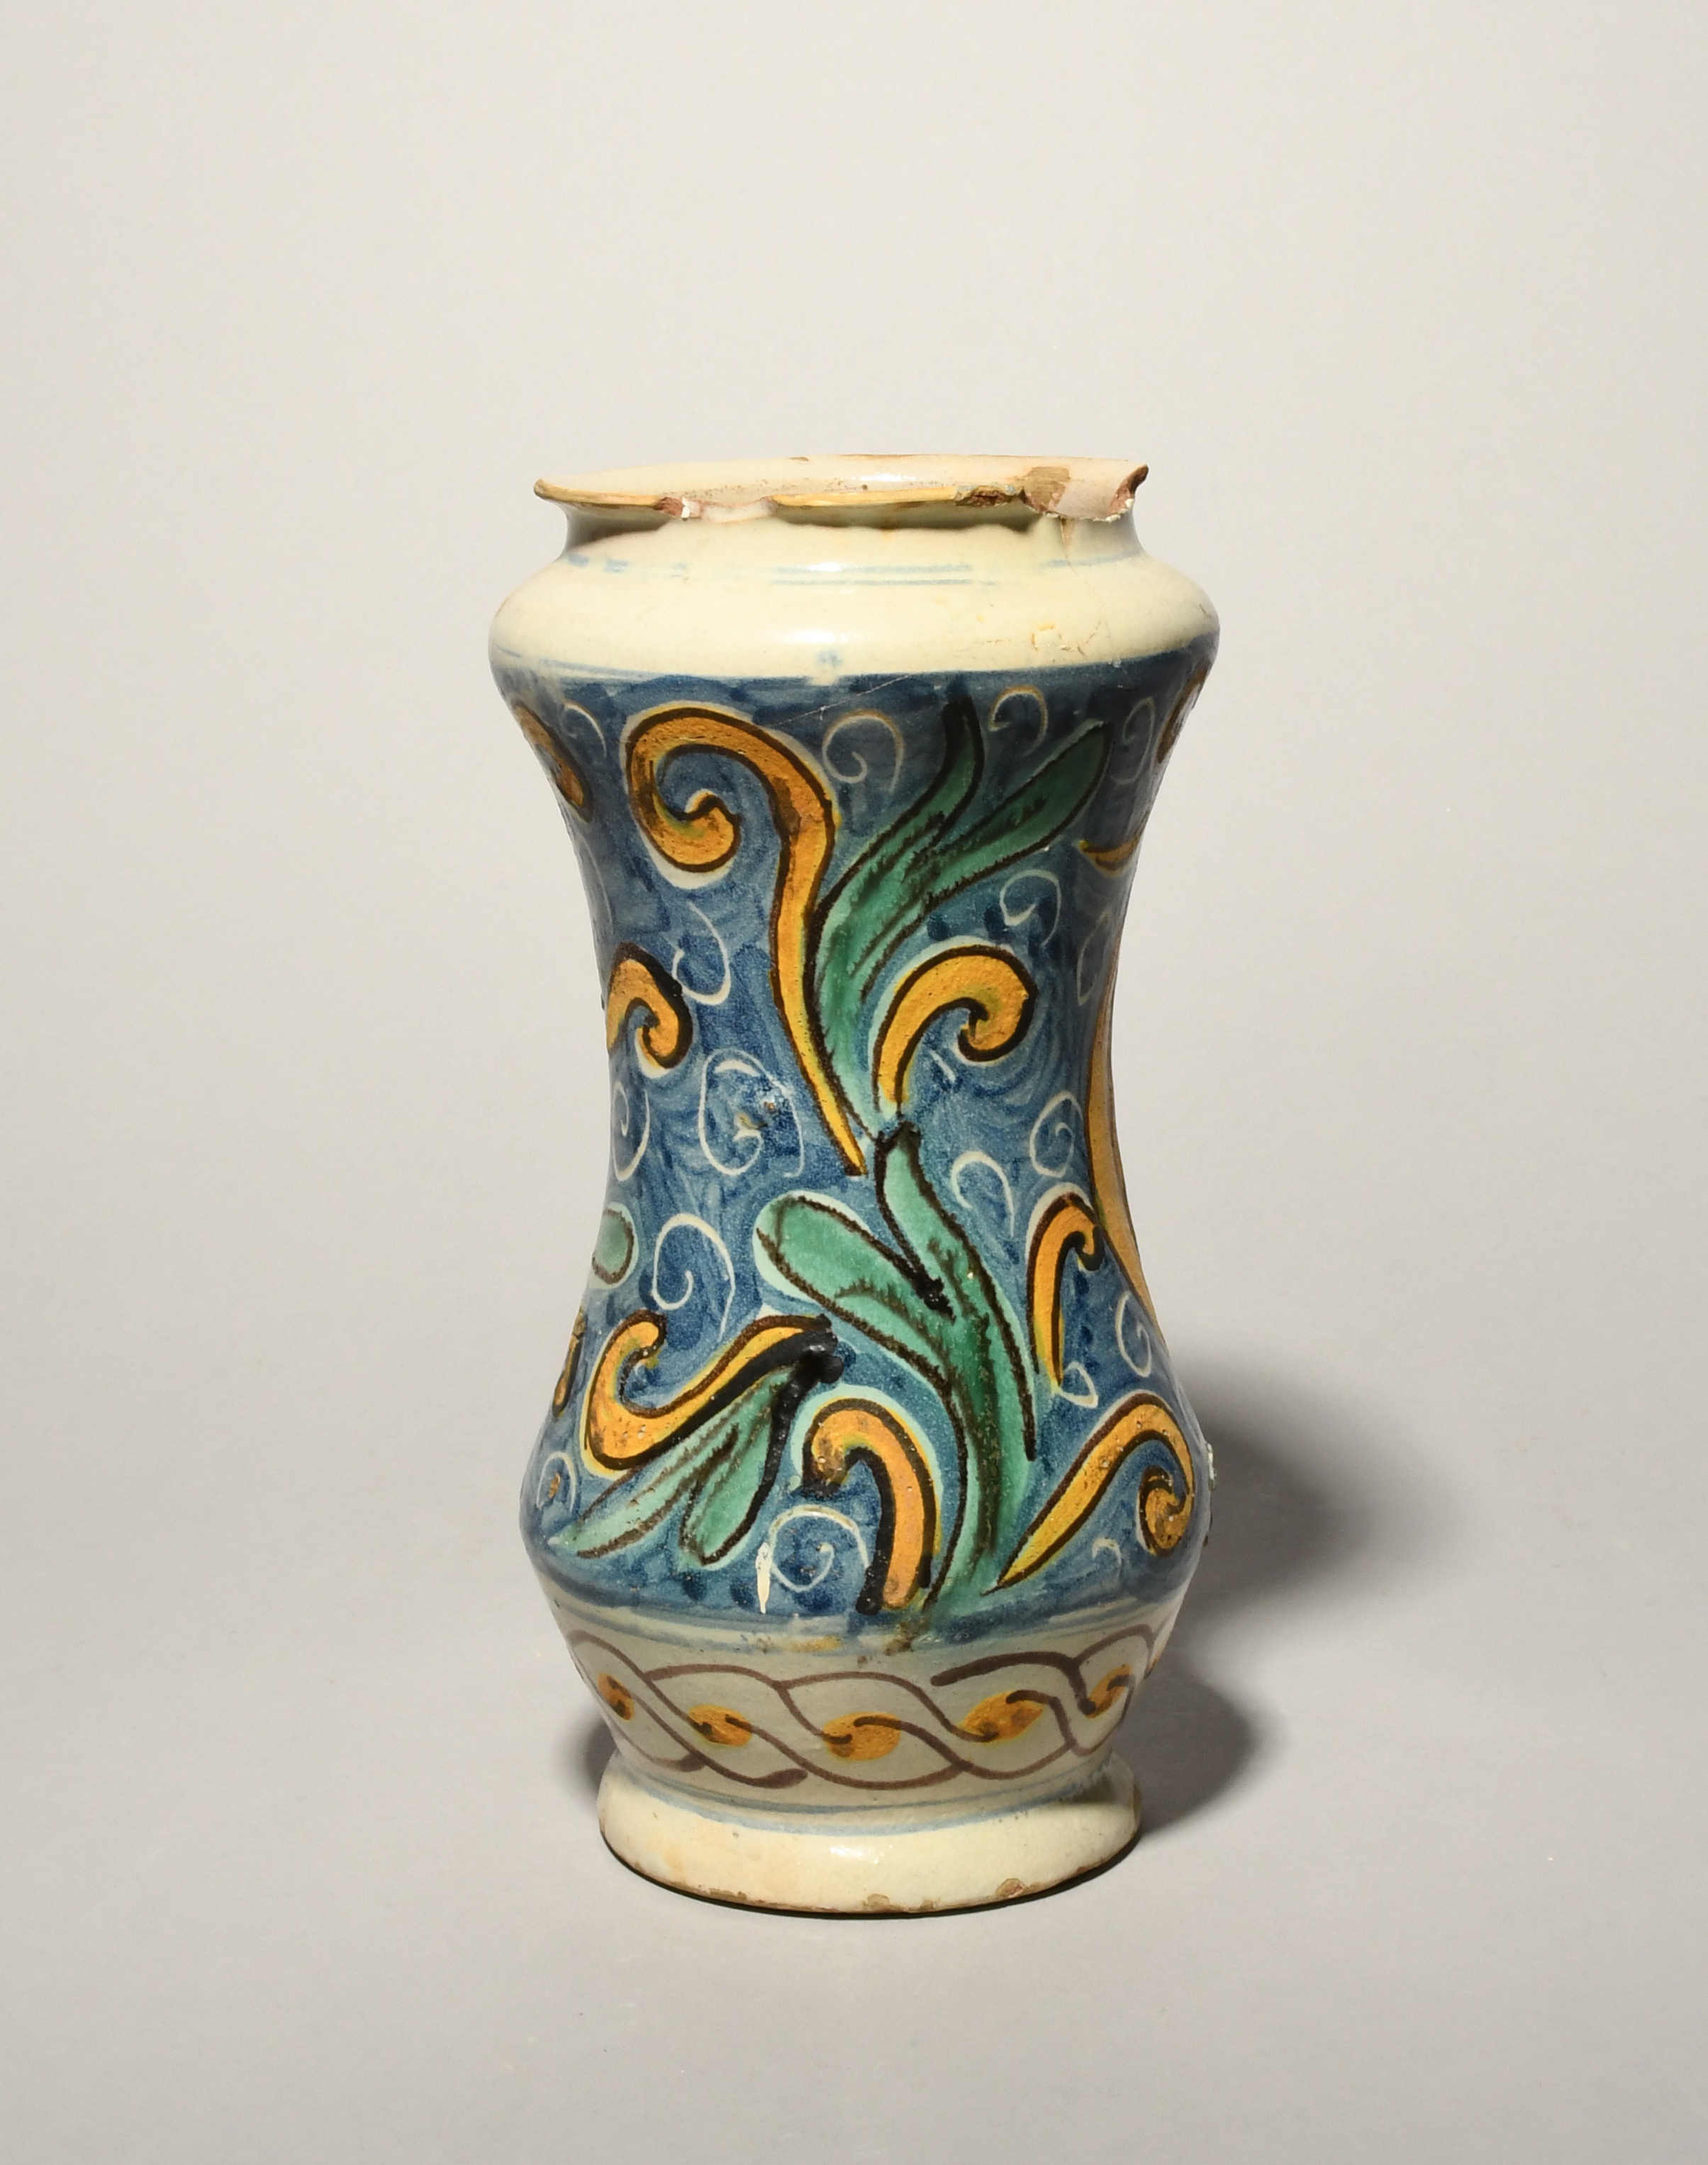 A Sicilian maiolica albarello, late 17th century, the waisted form painted in blue, green, yellow - Image 2 of 3